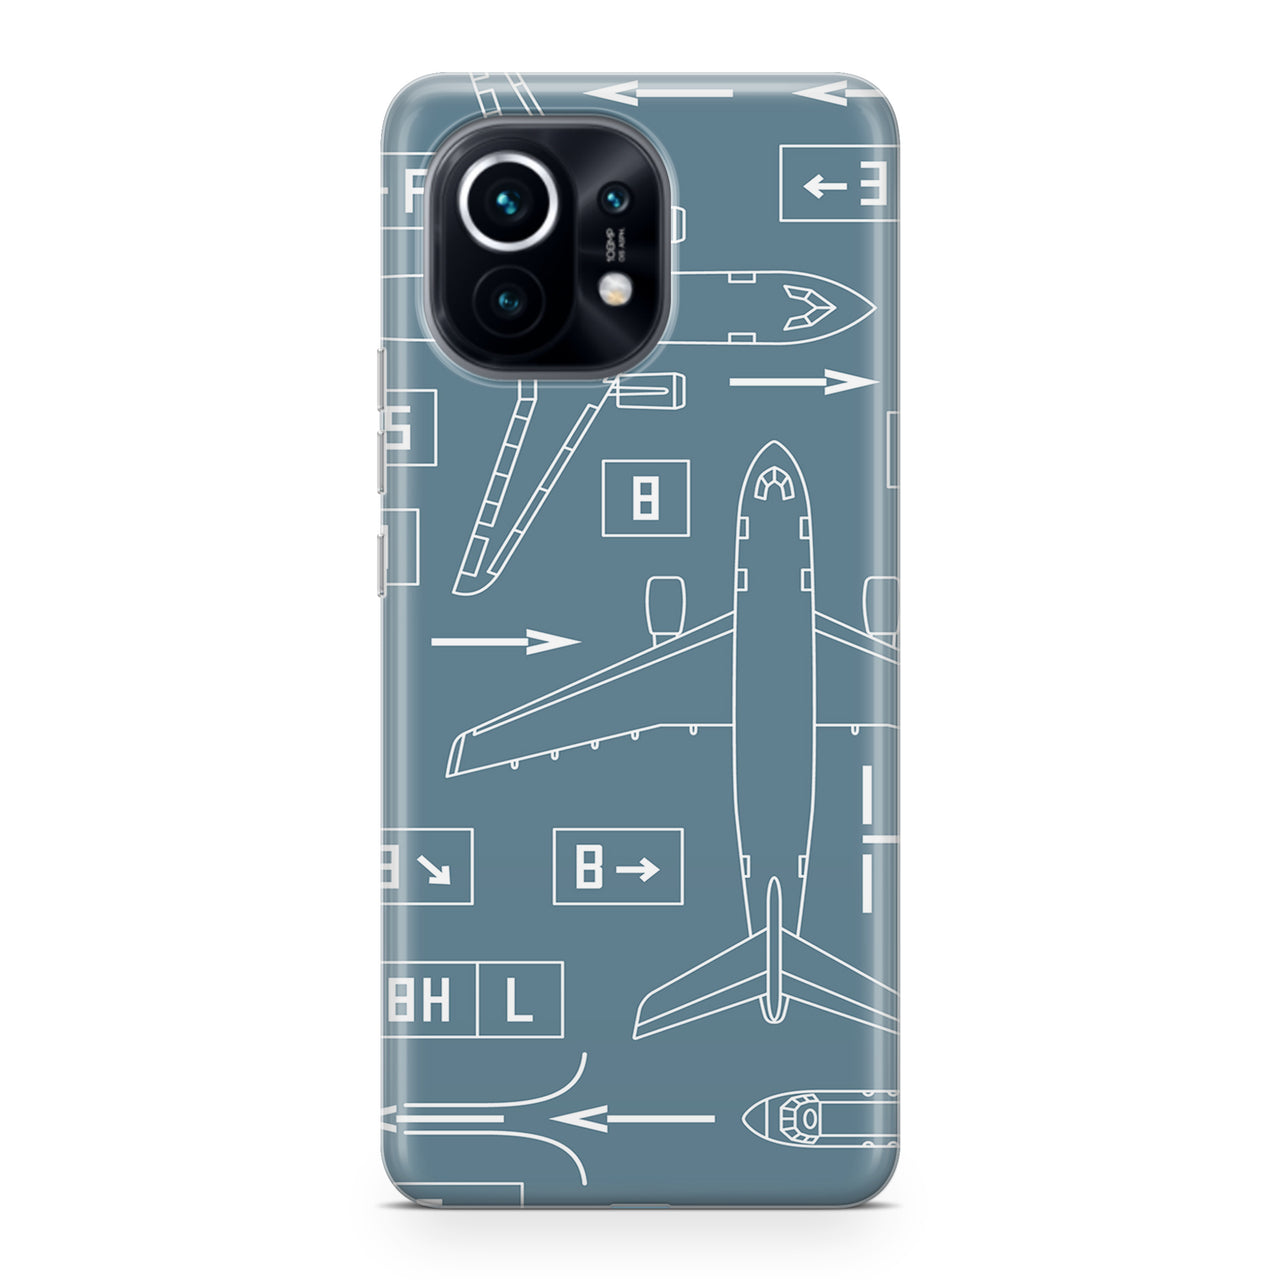 Jet Planes & Airport Signs Designed Xiaomi Cases